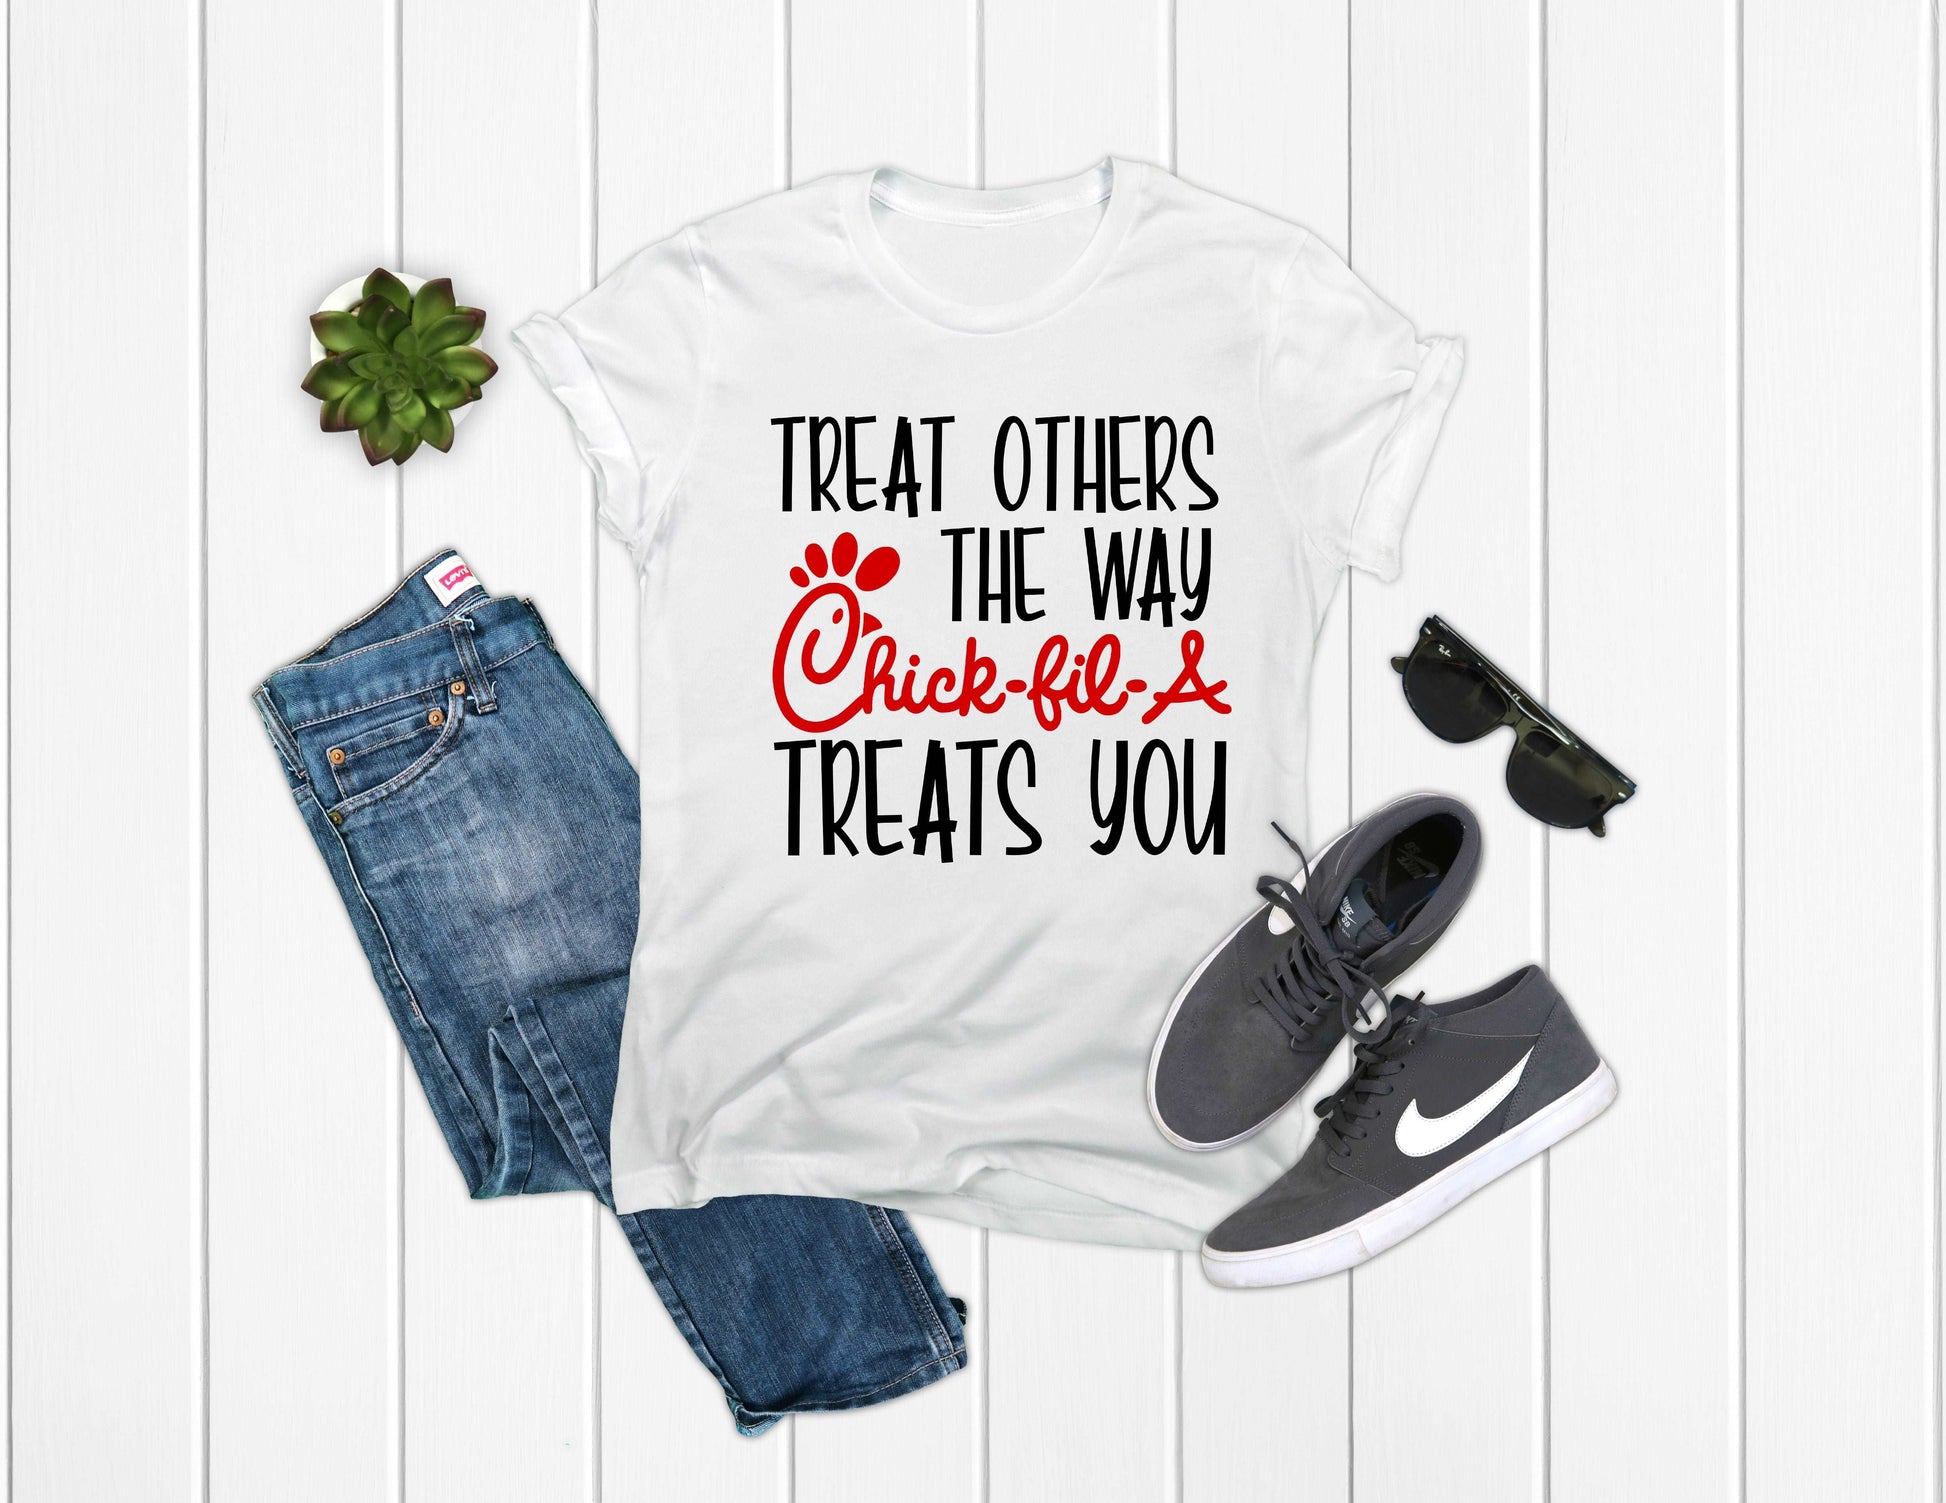 Treat Others The Way Chick-fil-A...-DaPrintFactory